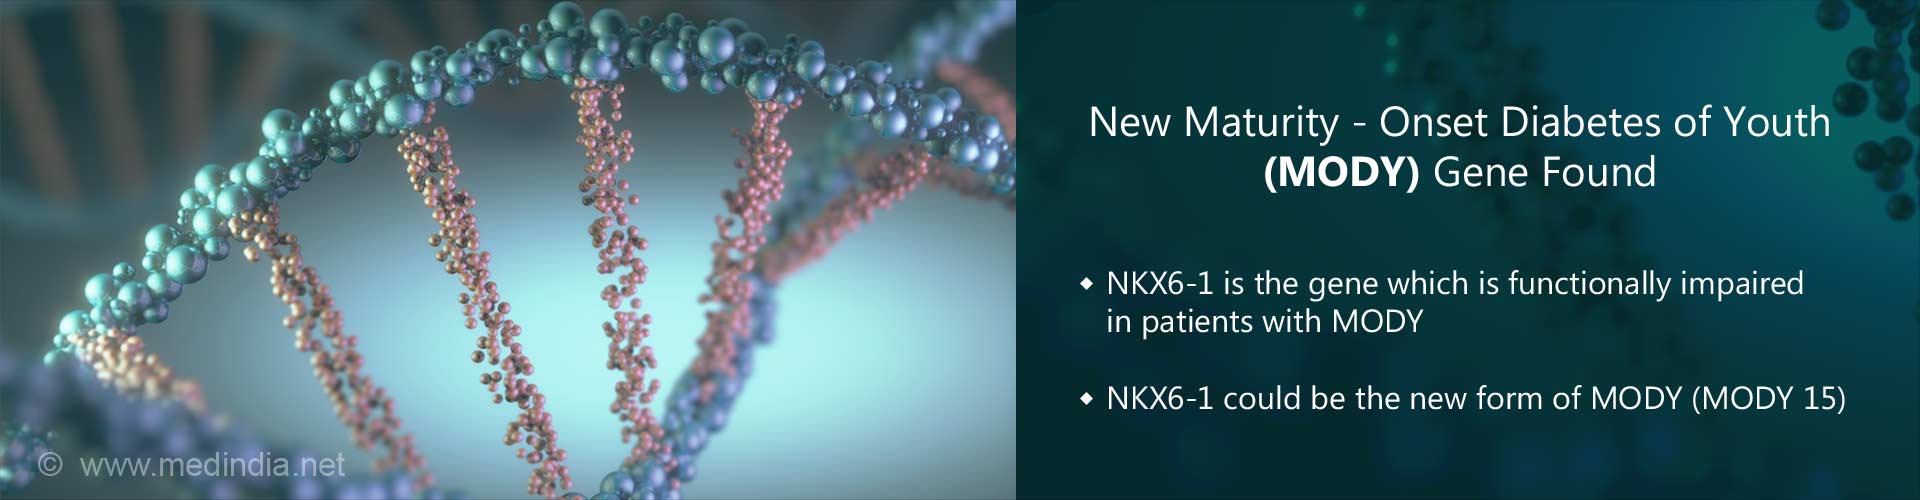 new maturity-onset diabetes of youth (MODY) gene found
- NKX6-1 is the gene which is functionally impaired in patients with MODY
- NKX6-1 could be the new form of MODY (MODY 15)